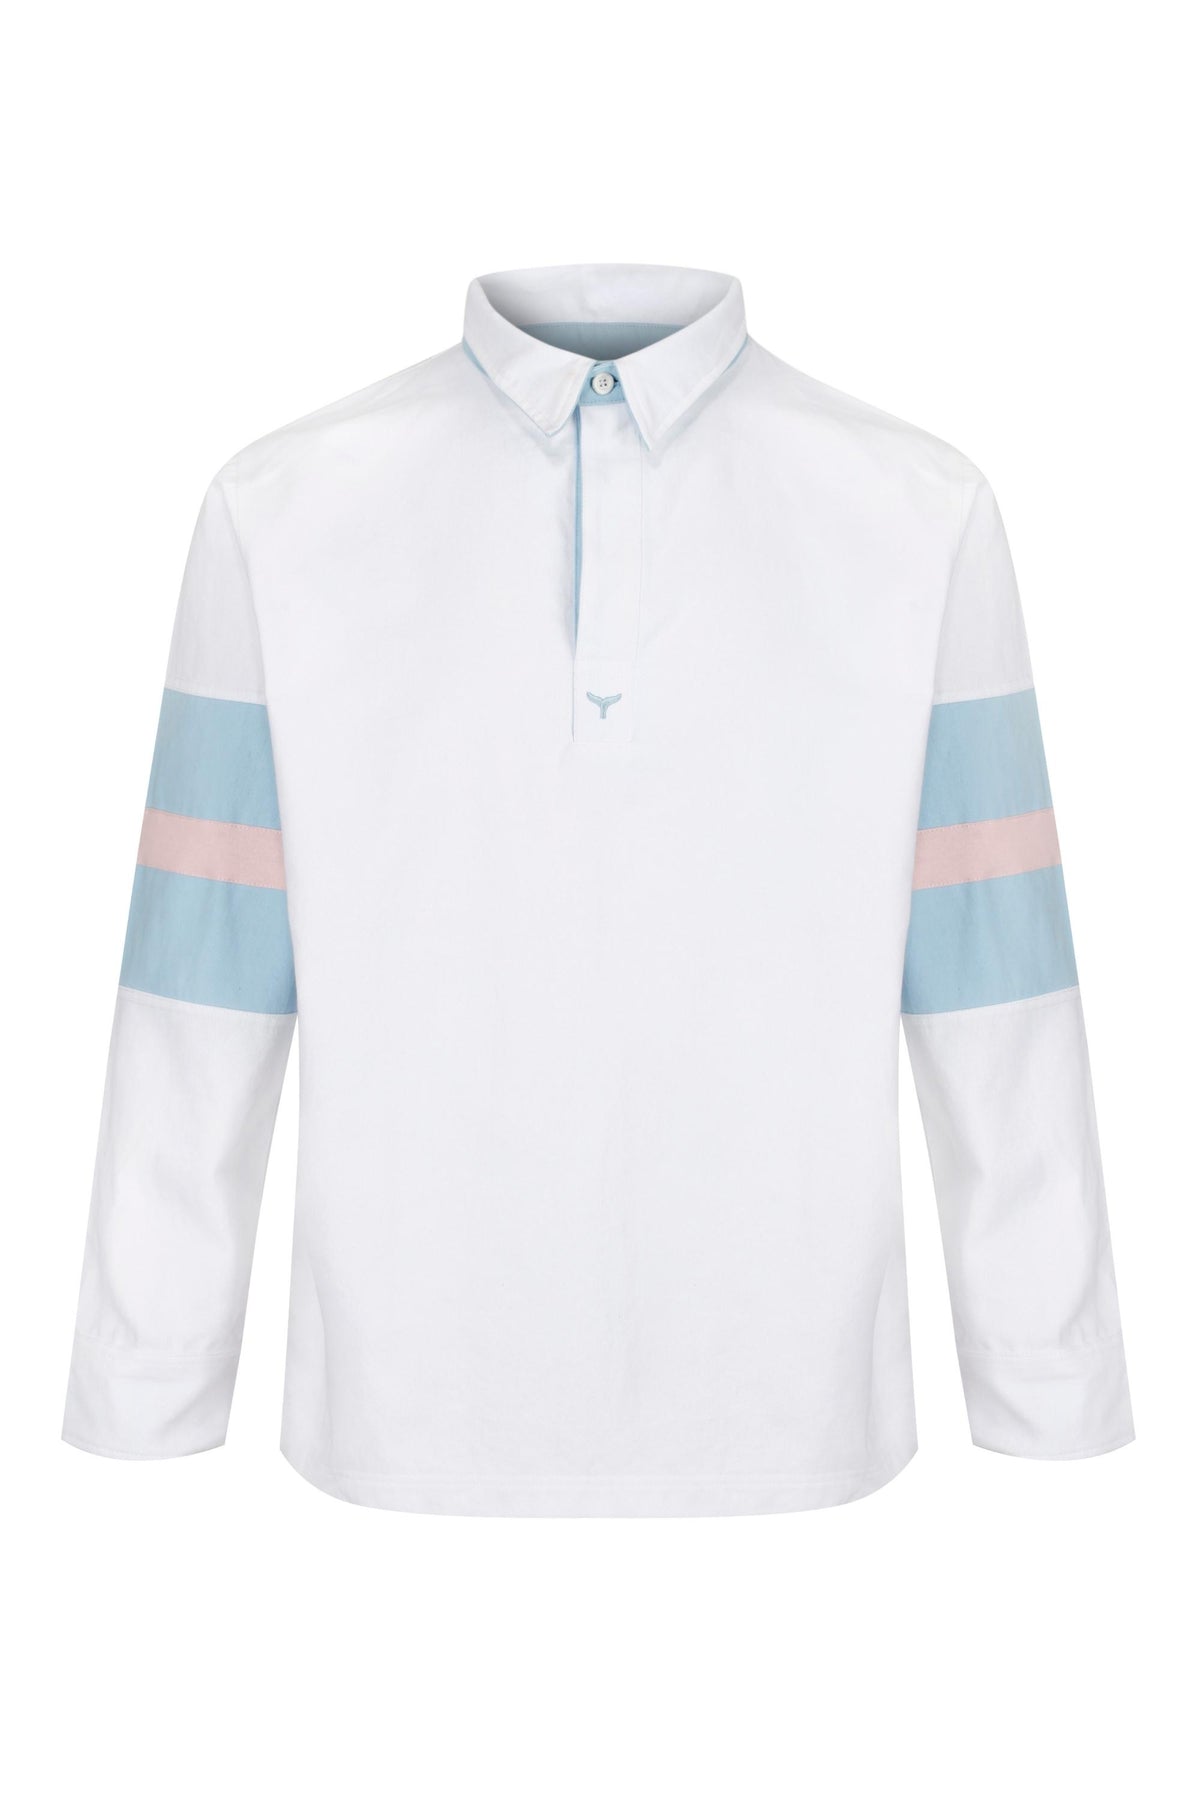 Salcombe Unisex Deck Shirt - White - Whale Of A Time Clothing